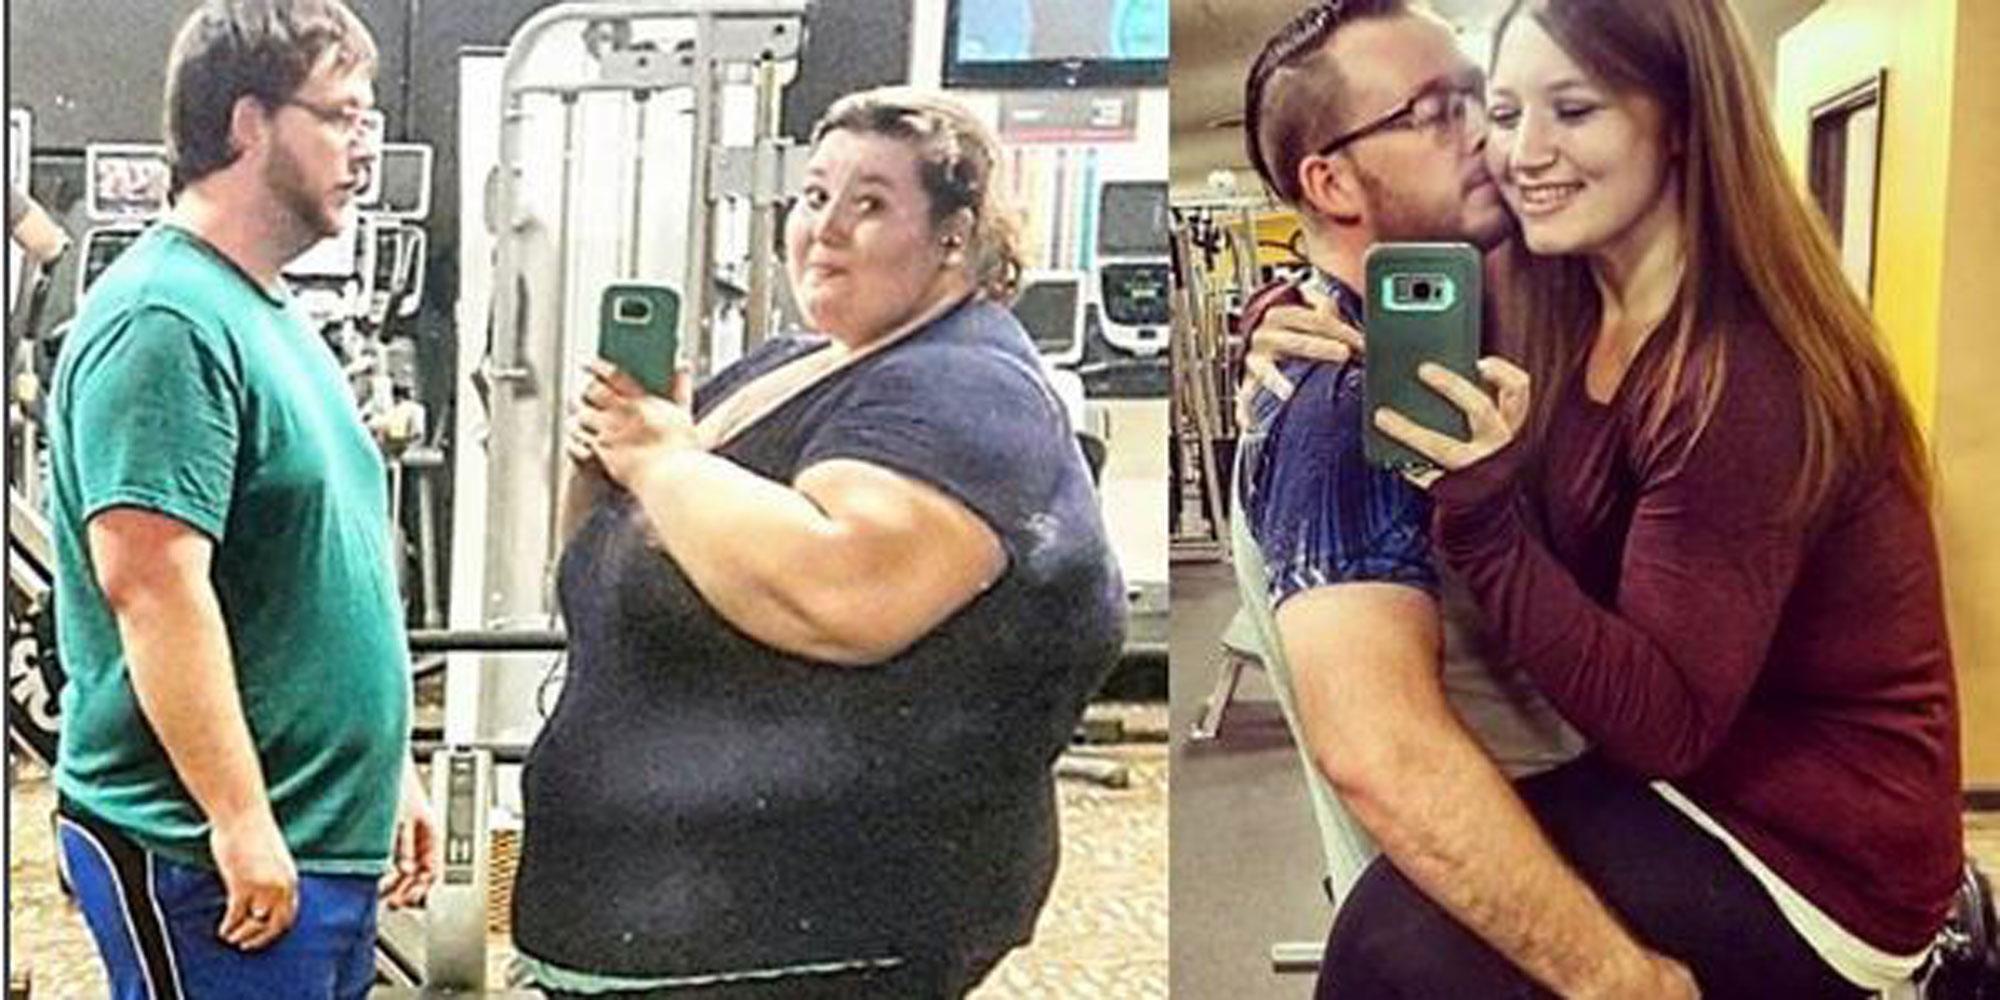 weight loss transformation couple massive lexi danny reed lose instagram results amazing commemorates resolution pounds